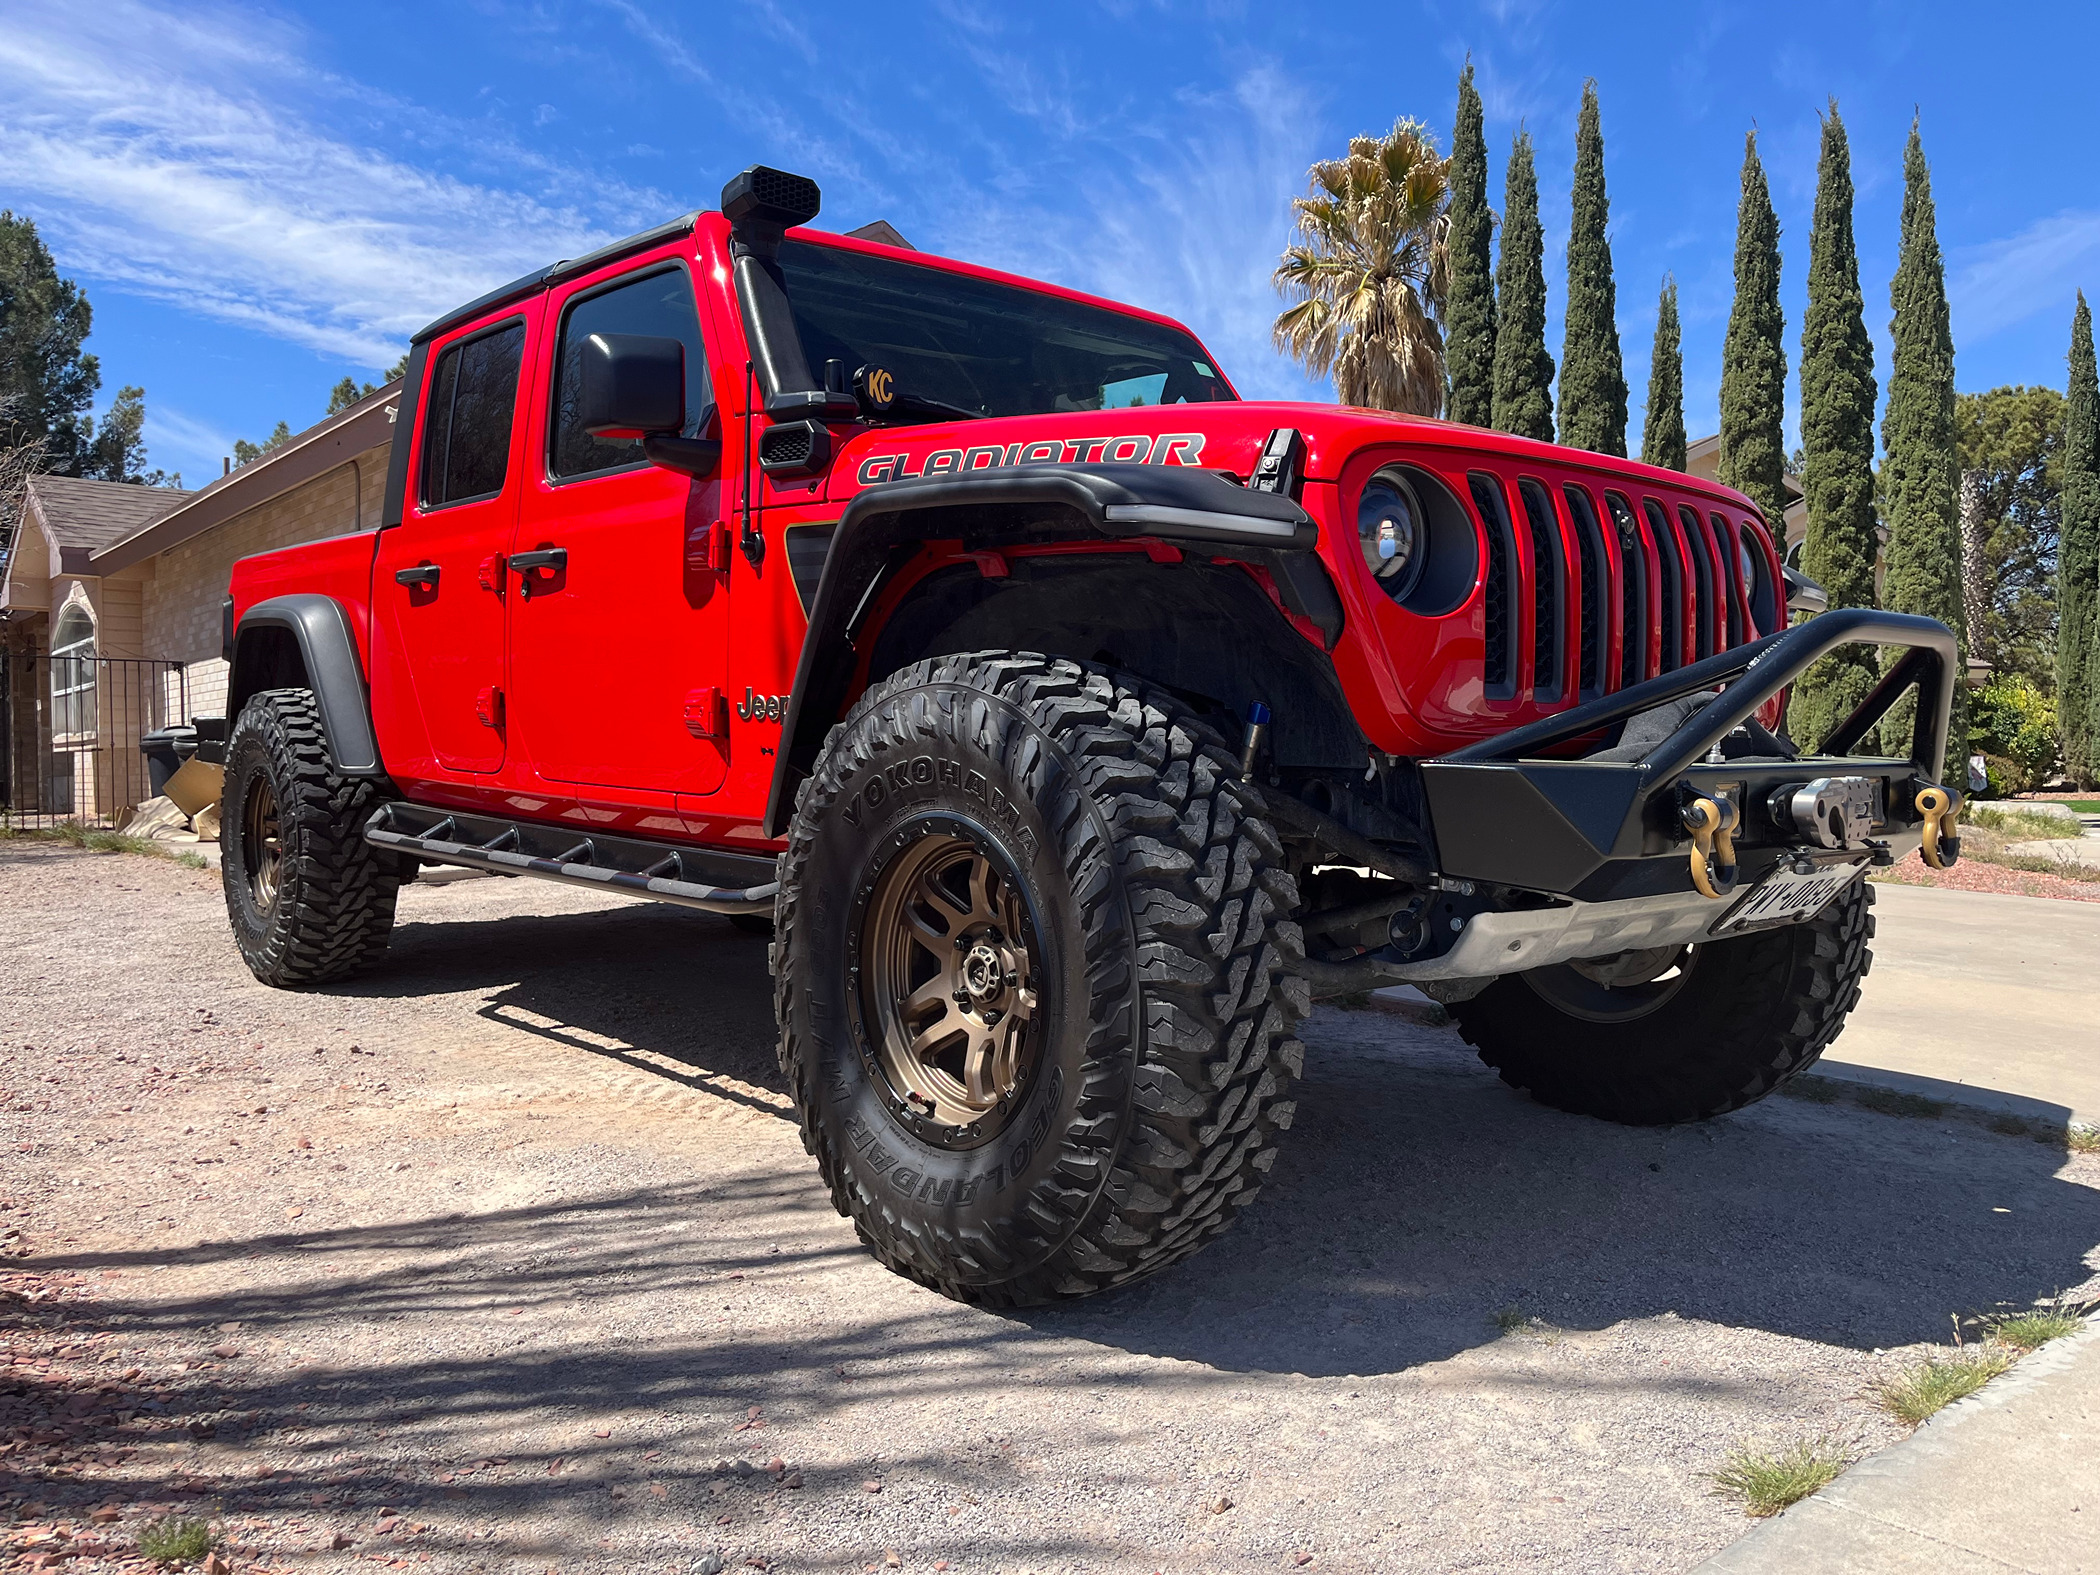 Jeep Gladiator Tuscadero color available on Jeep Gladiator for the first time 1714920072350-w3